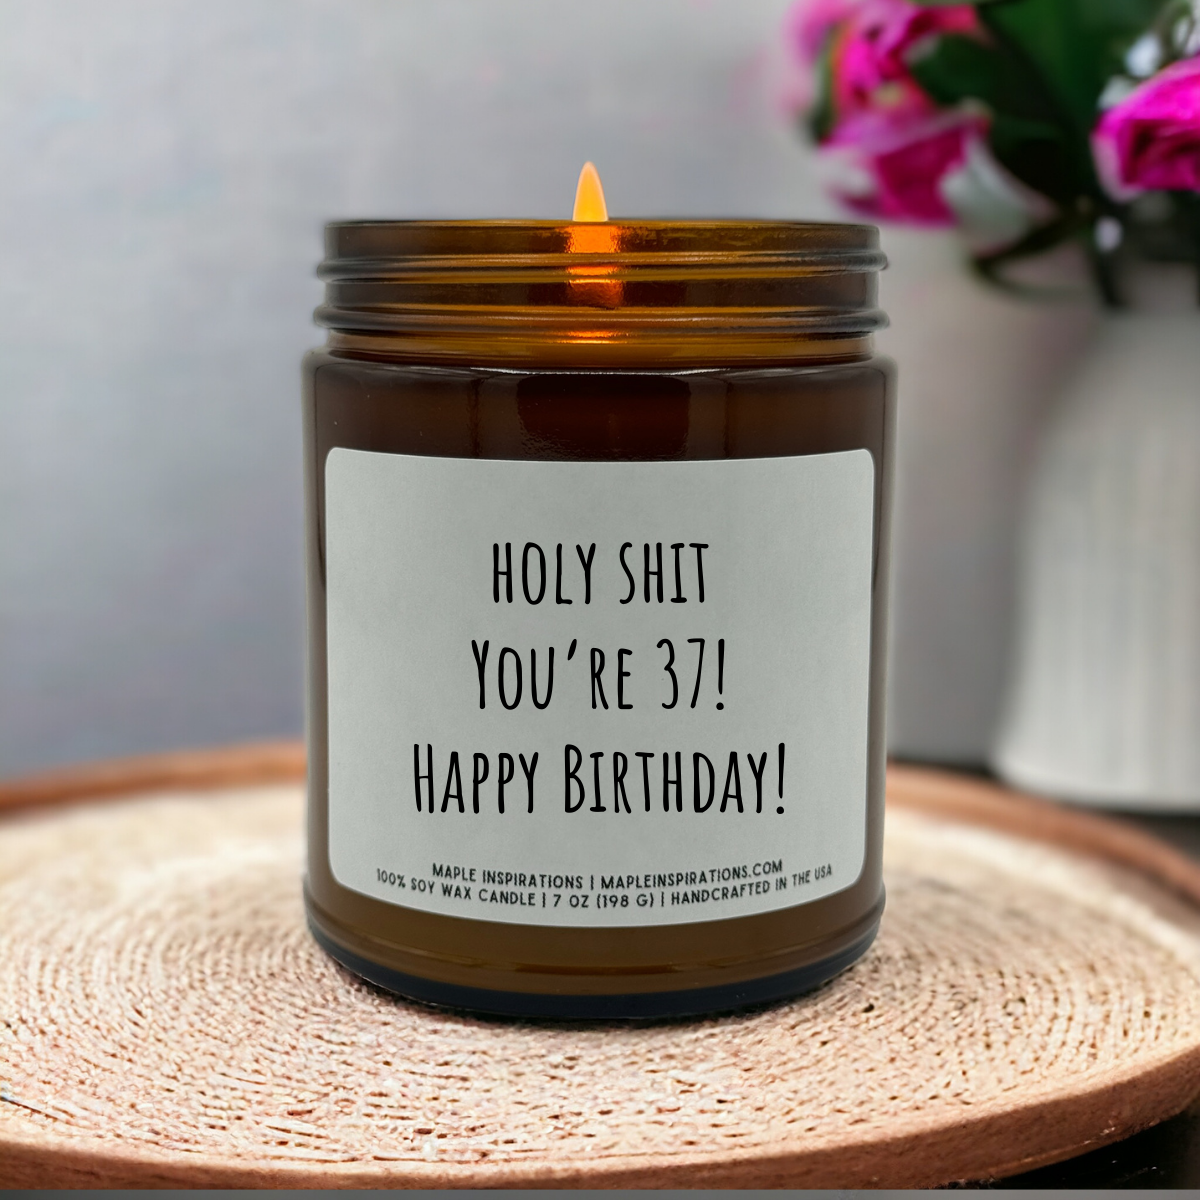 37th Birthday Candle, Funny Candle, Funny 37th Birthday Gift, Candle Gift For 37th Birthday Turning 37 Years Old, Holy Shit You're 37